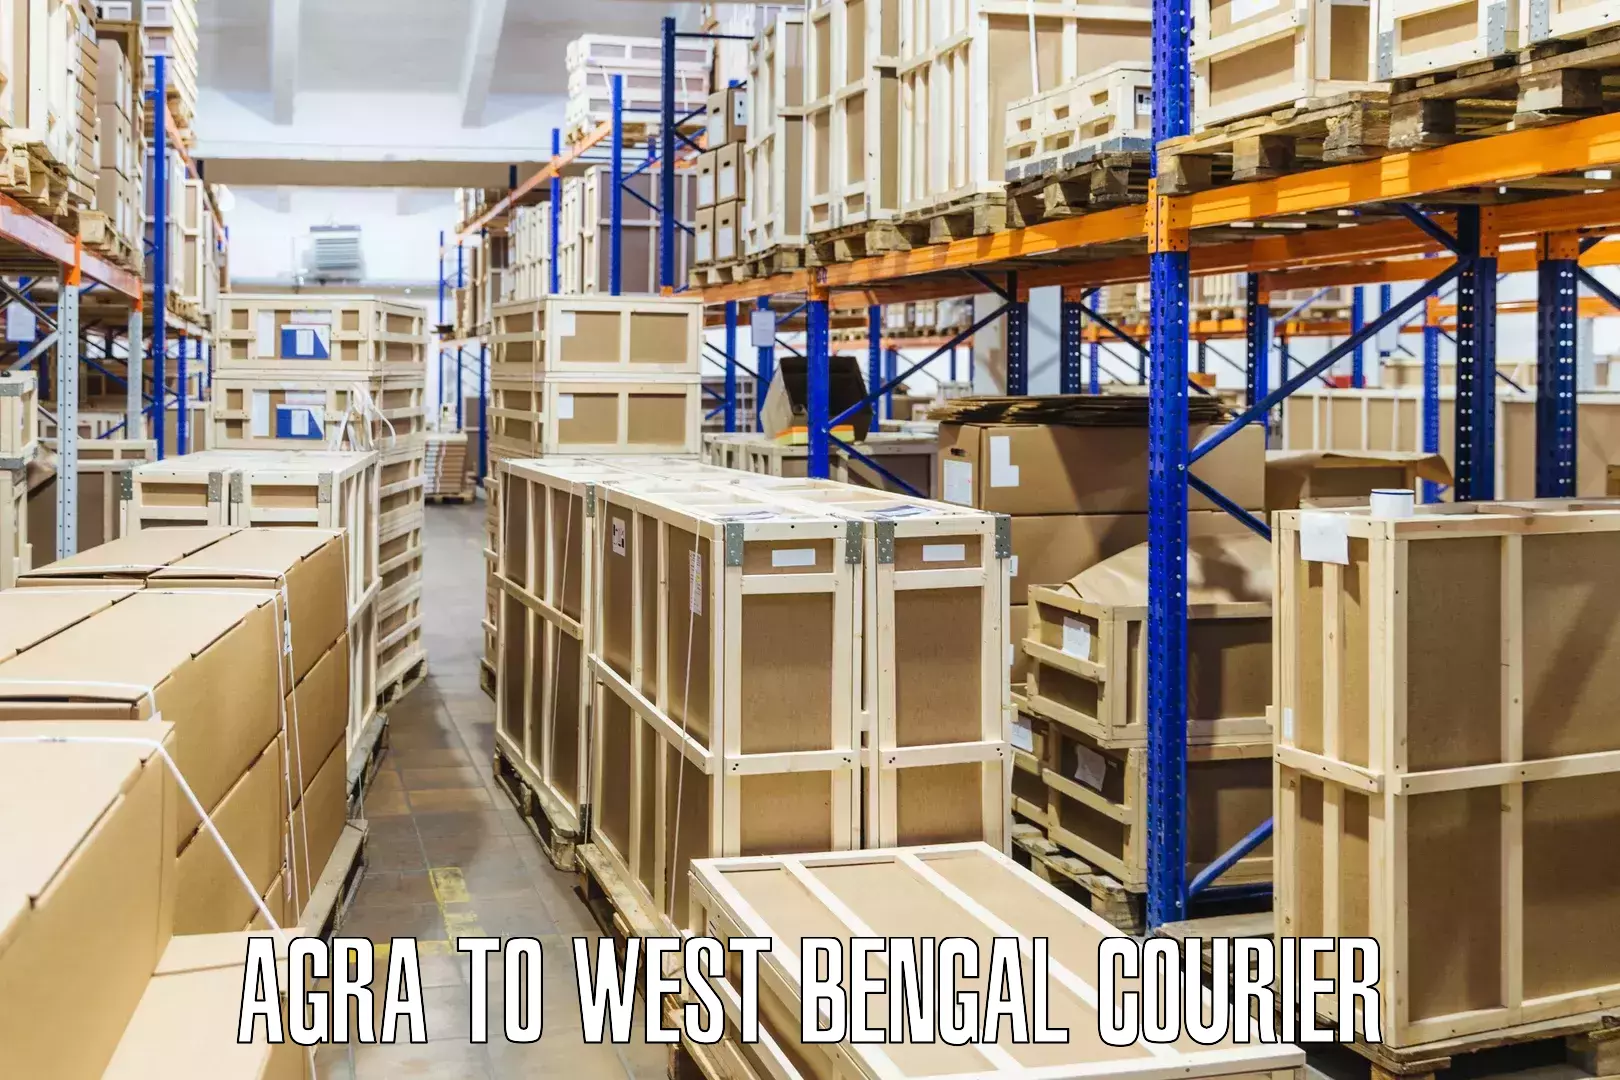 Reliable logistics providers Agra to West Bengal